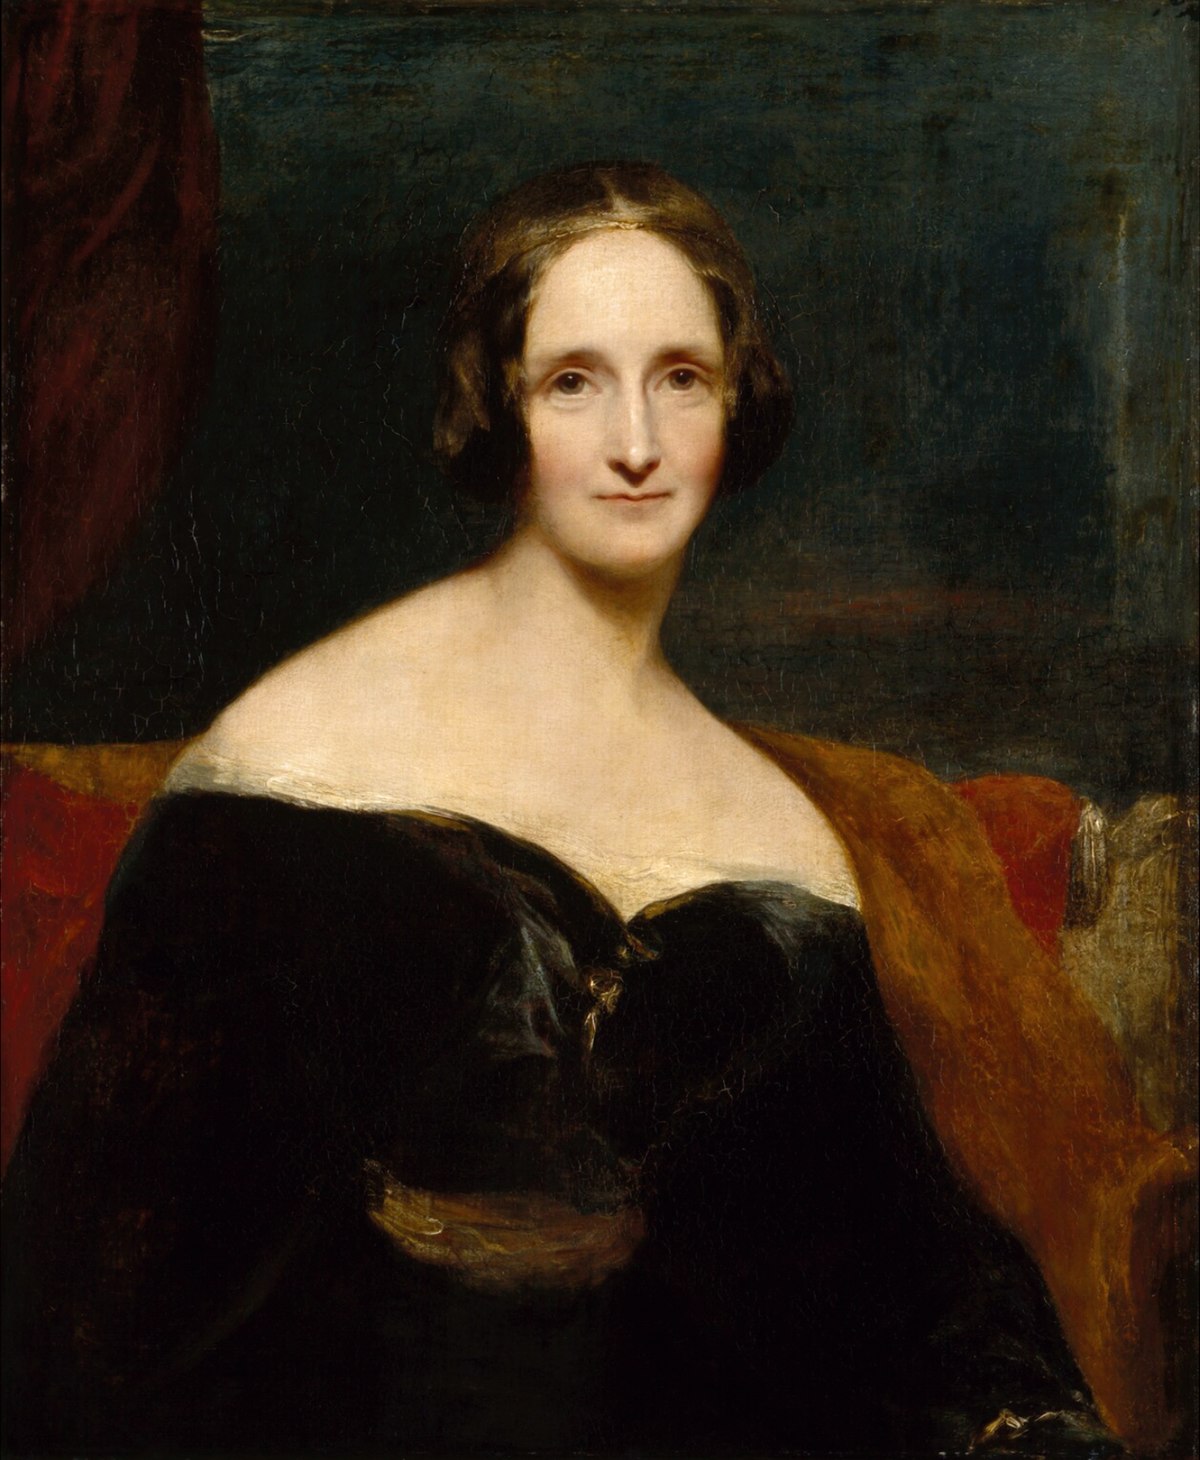 Mary Shelley's portrait 